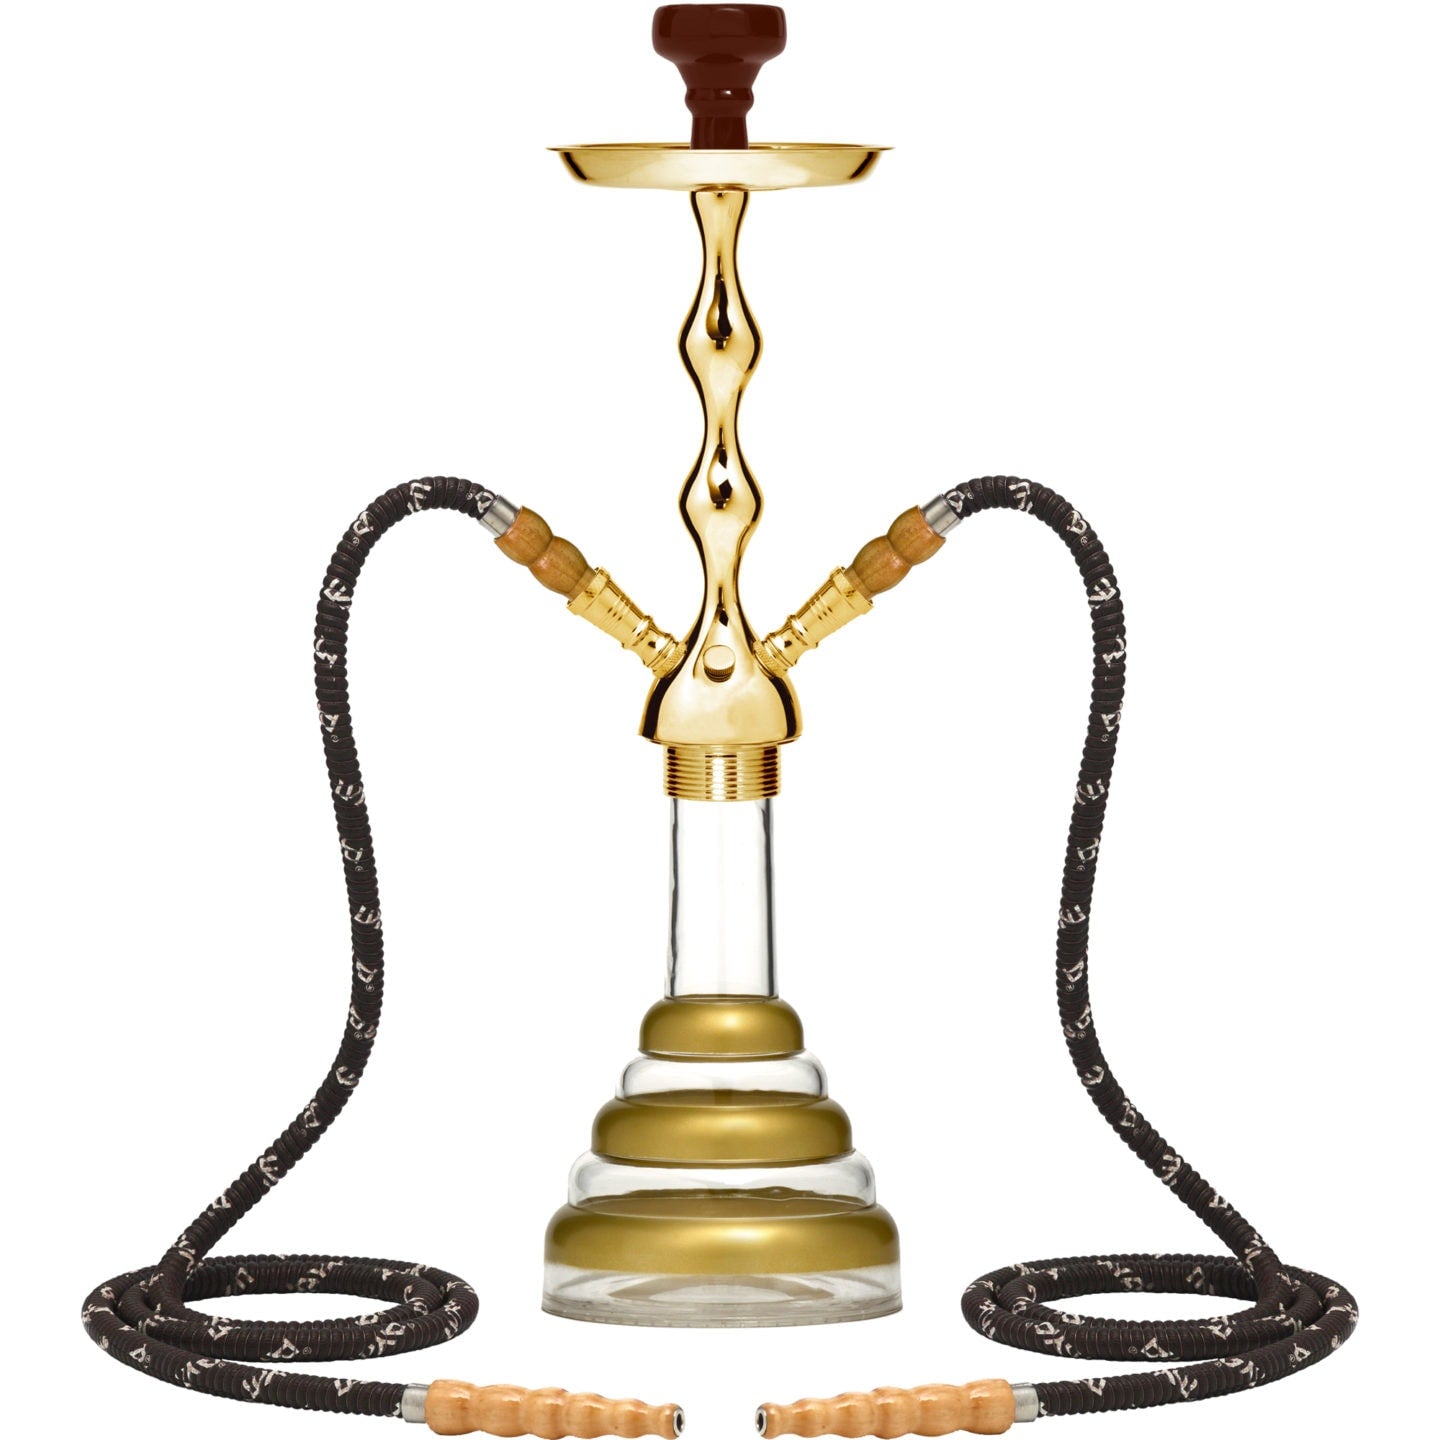 Gold Acrylic 2 Hose Gold Hookah #color_Gold